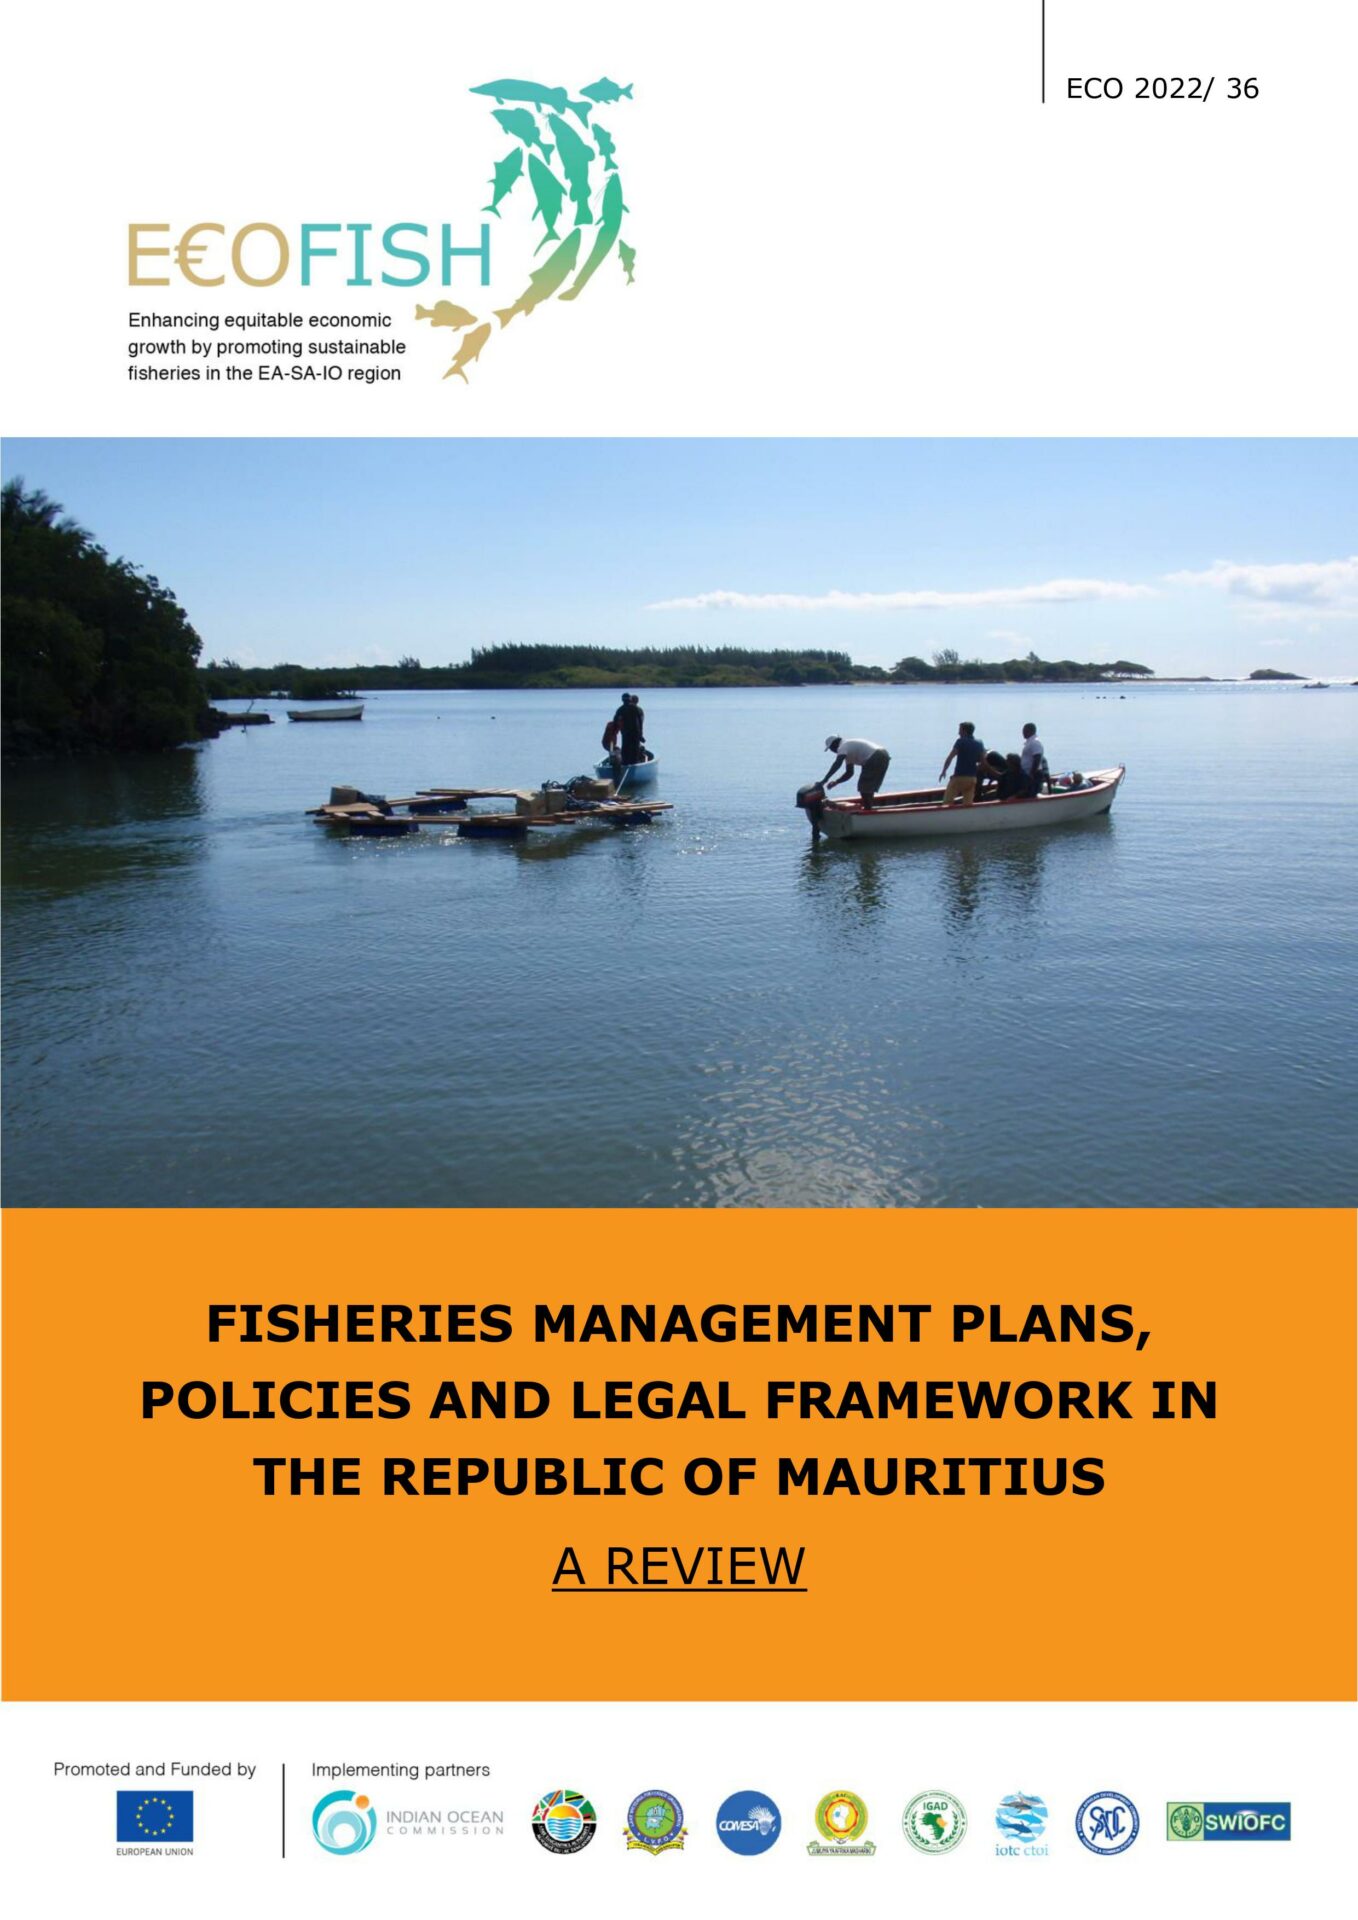 FISHERIES-MANAGEMENT-PLANS-AND-POLICY-FRAMEWORK-FOR-SMALL-SCALE-FISHERIES-IN-new